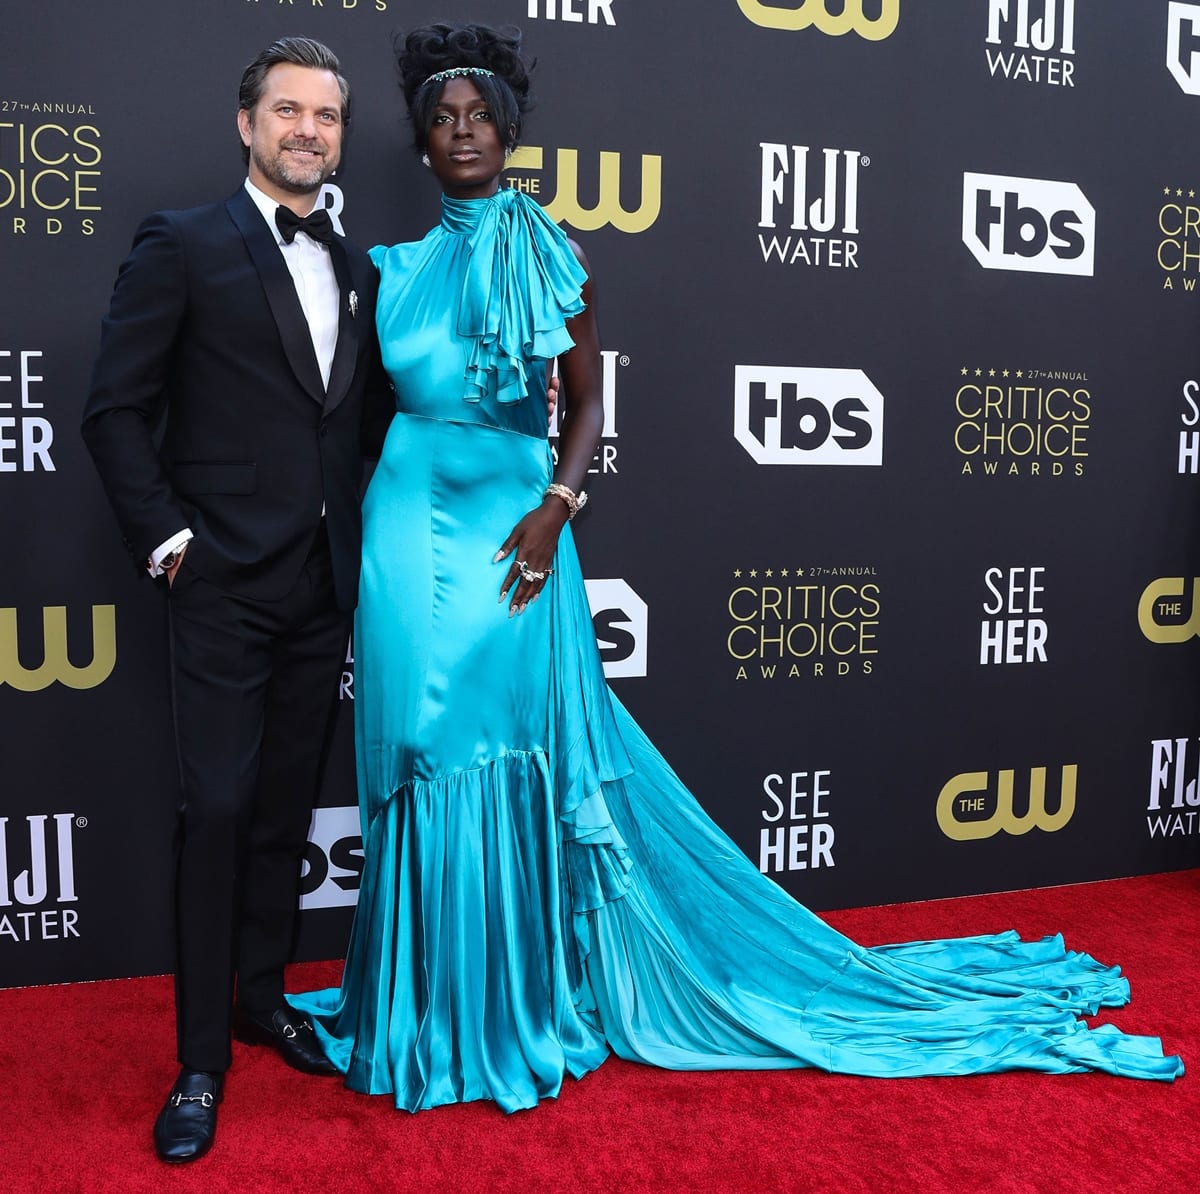 Jodie Turner-Smith, in a bright blue Gucci dress with Bulgari jewelry, was joined by her husband Joshua Jackson at the 27th Annual Critics Choice Awards